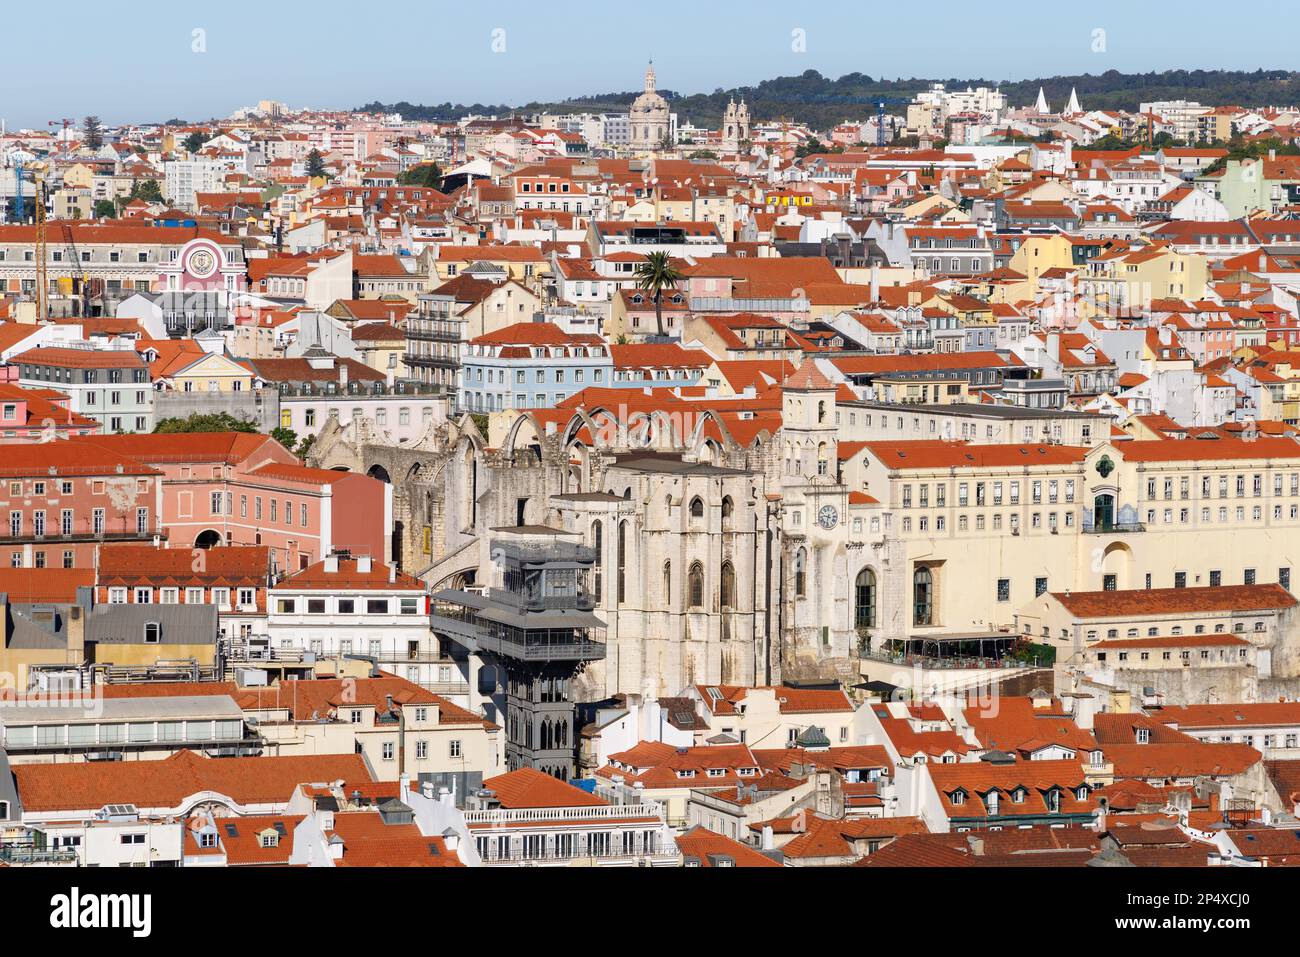 Lisbon, capital of Portugal. Cityscape with Santa Justa Lift, Elevador de Santa Justa and ruined Carmo Church. Rooftop view over historic downtown. Stock Photo